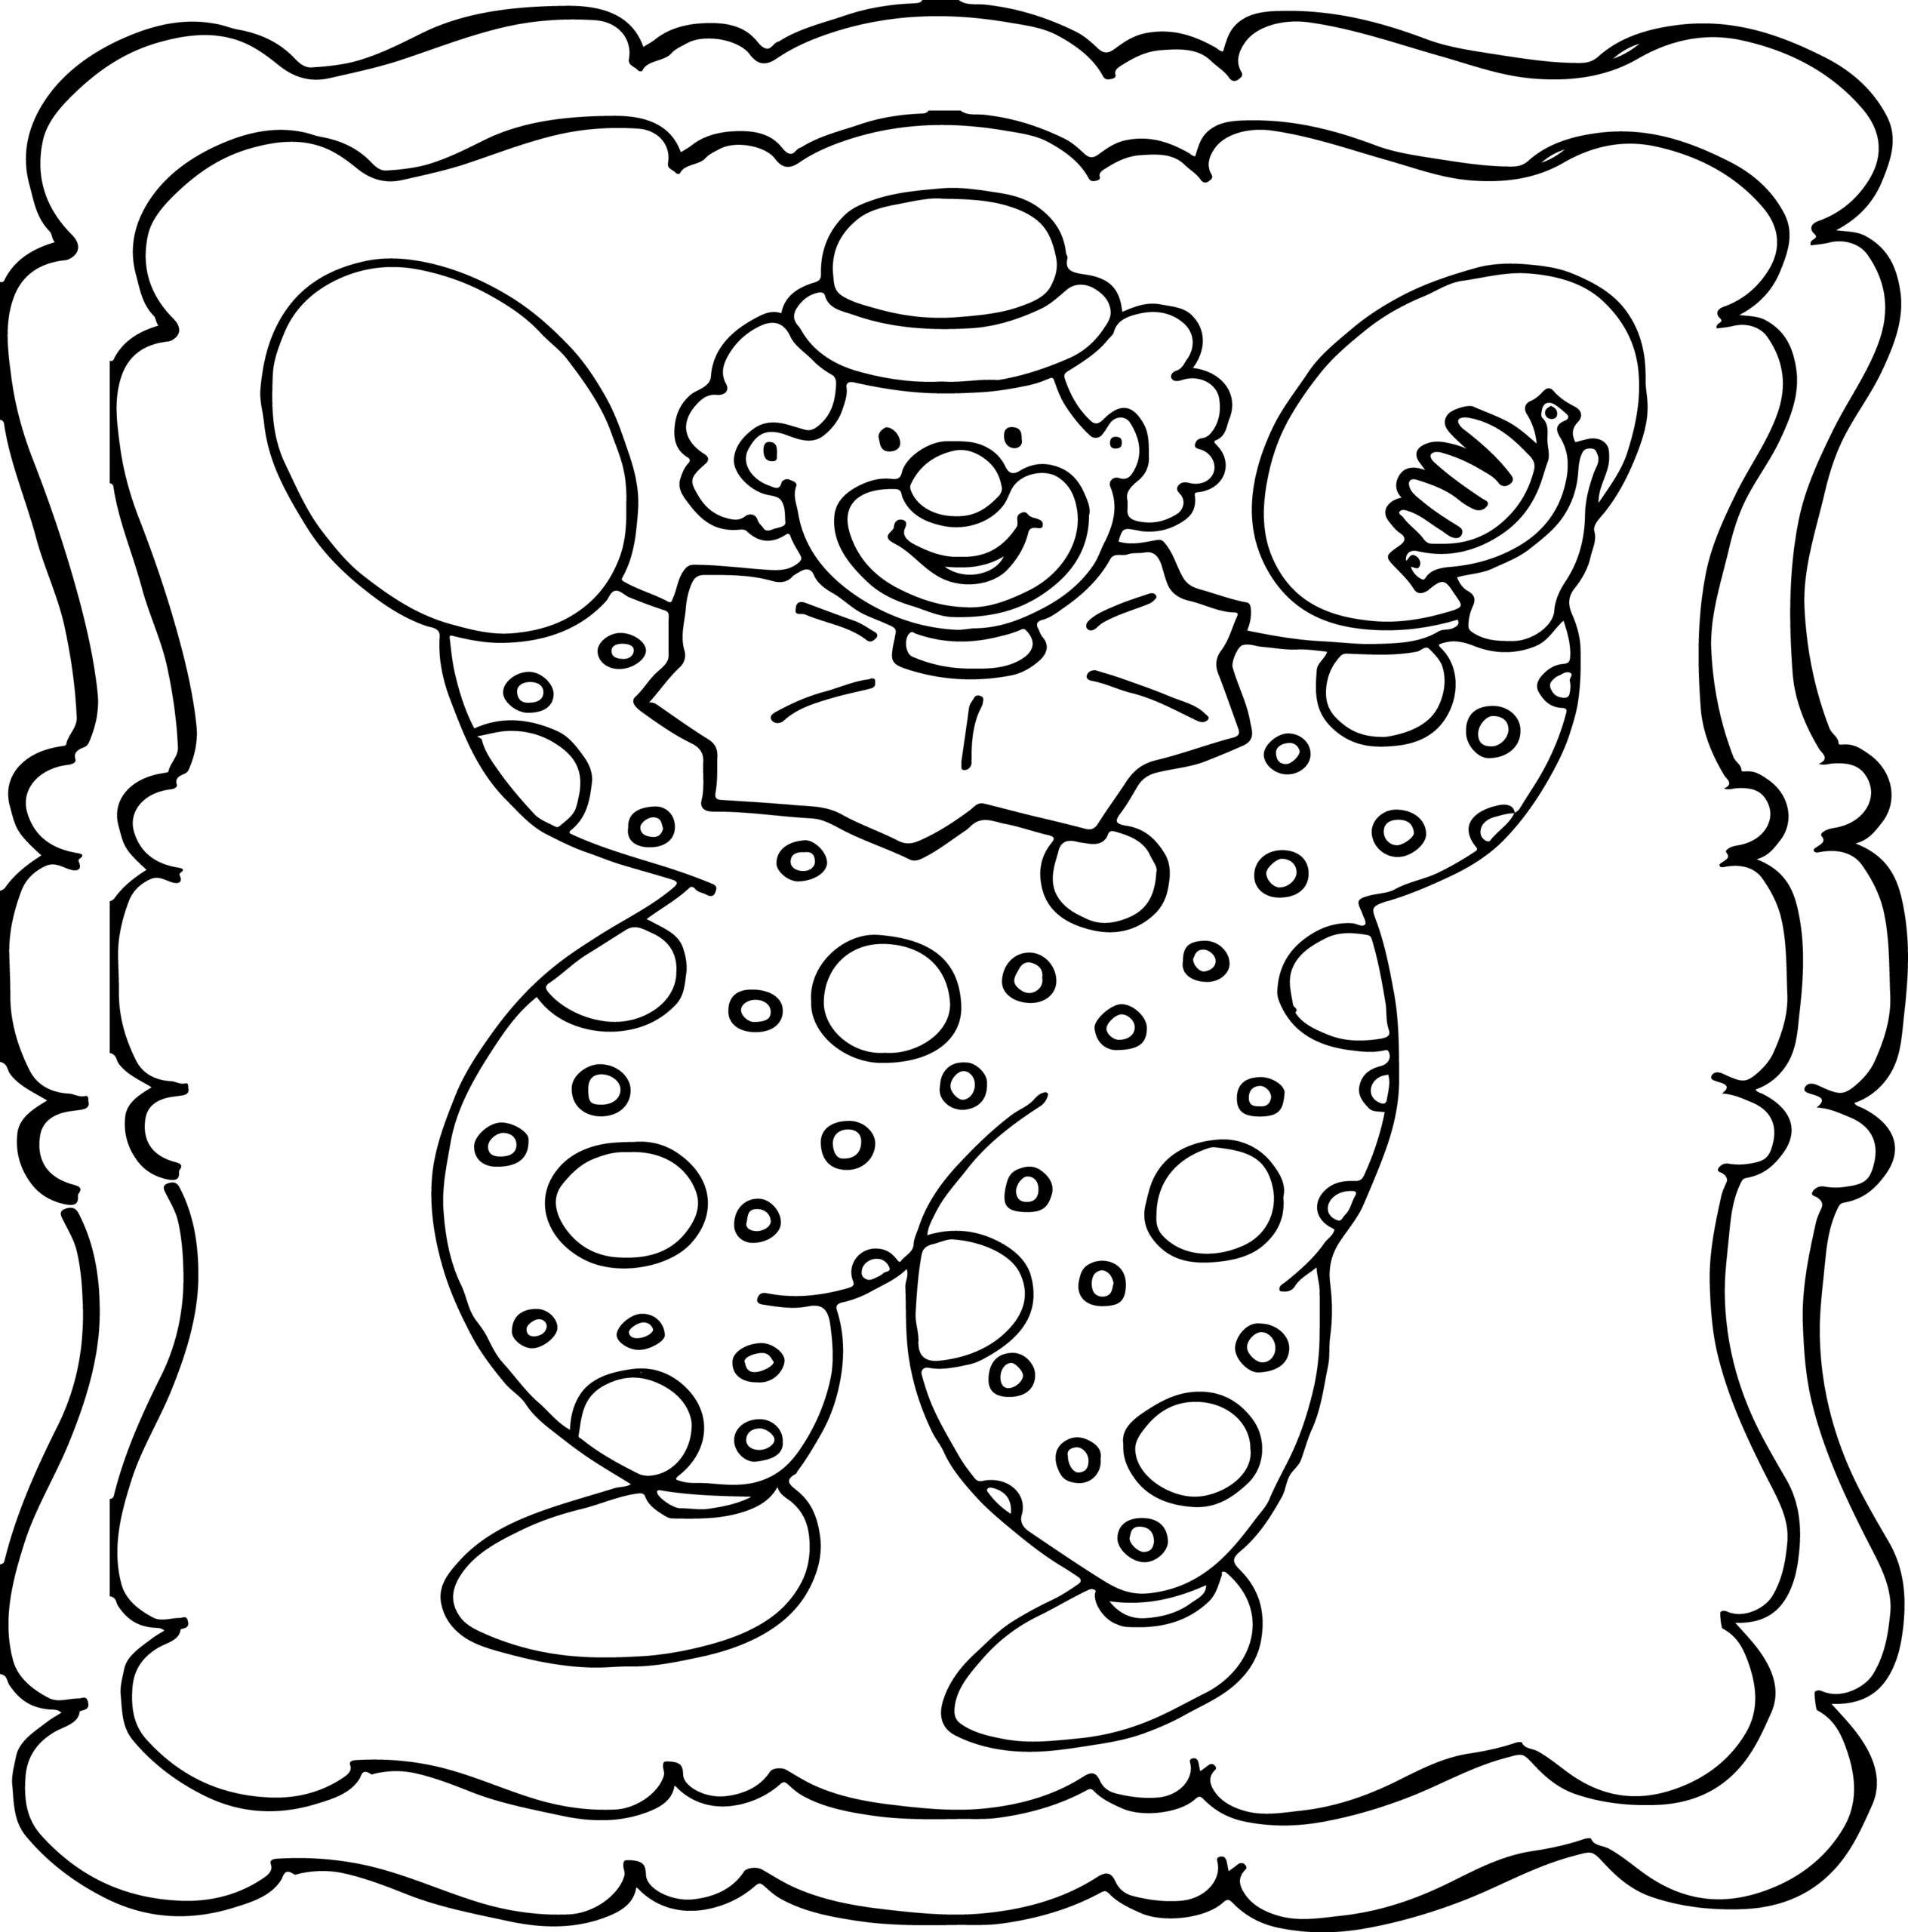 Clown coloring book easy and fun clowns coloring book for kids made by teachers